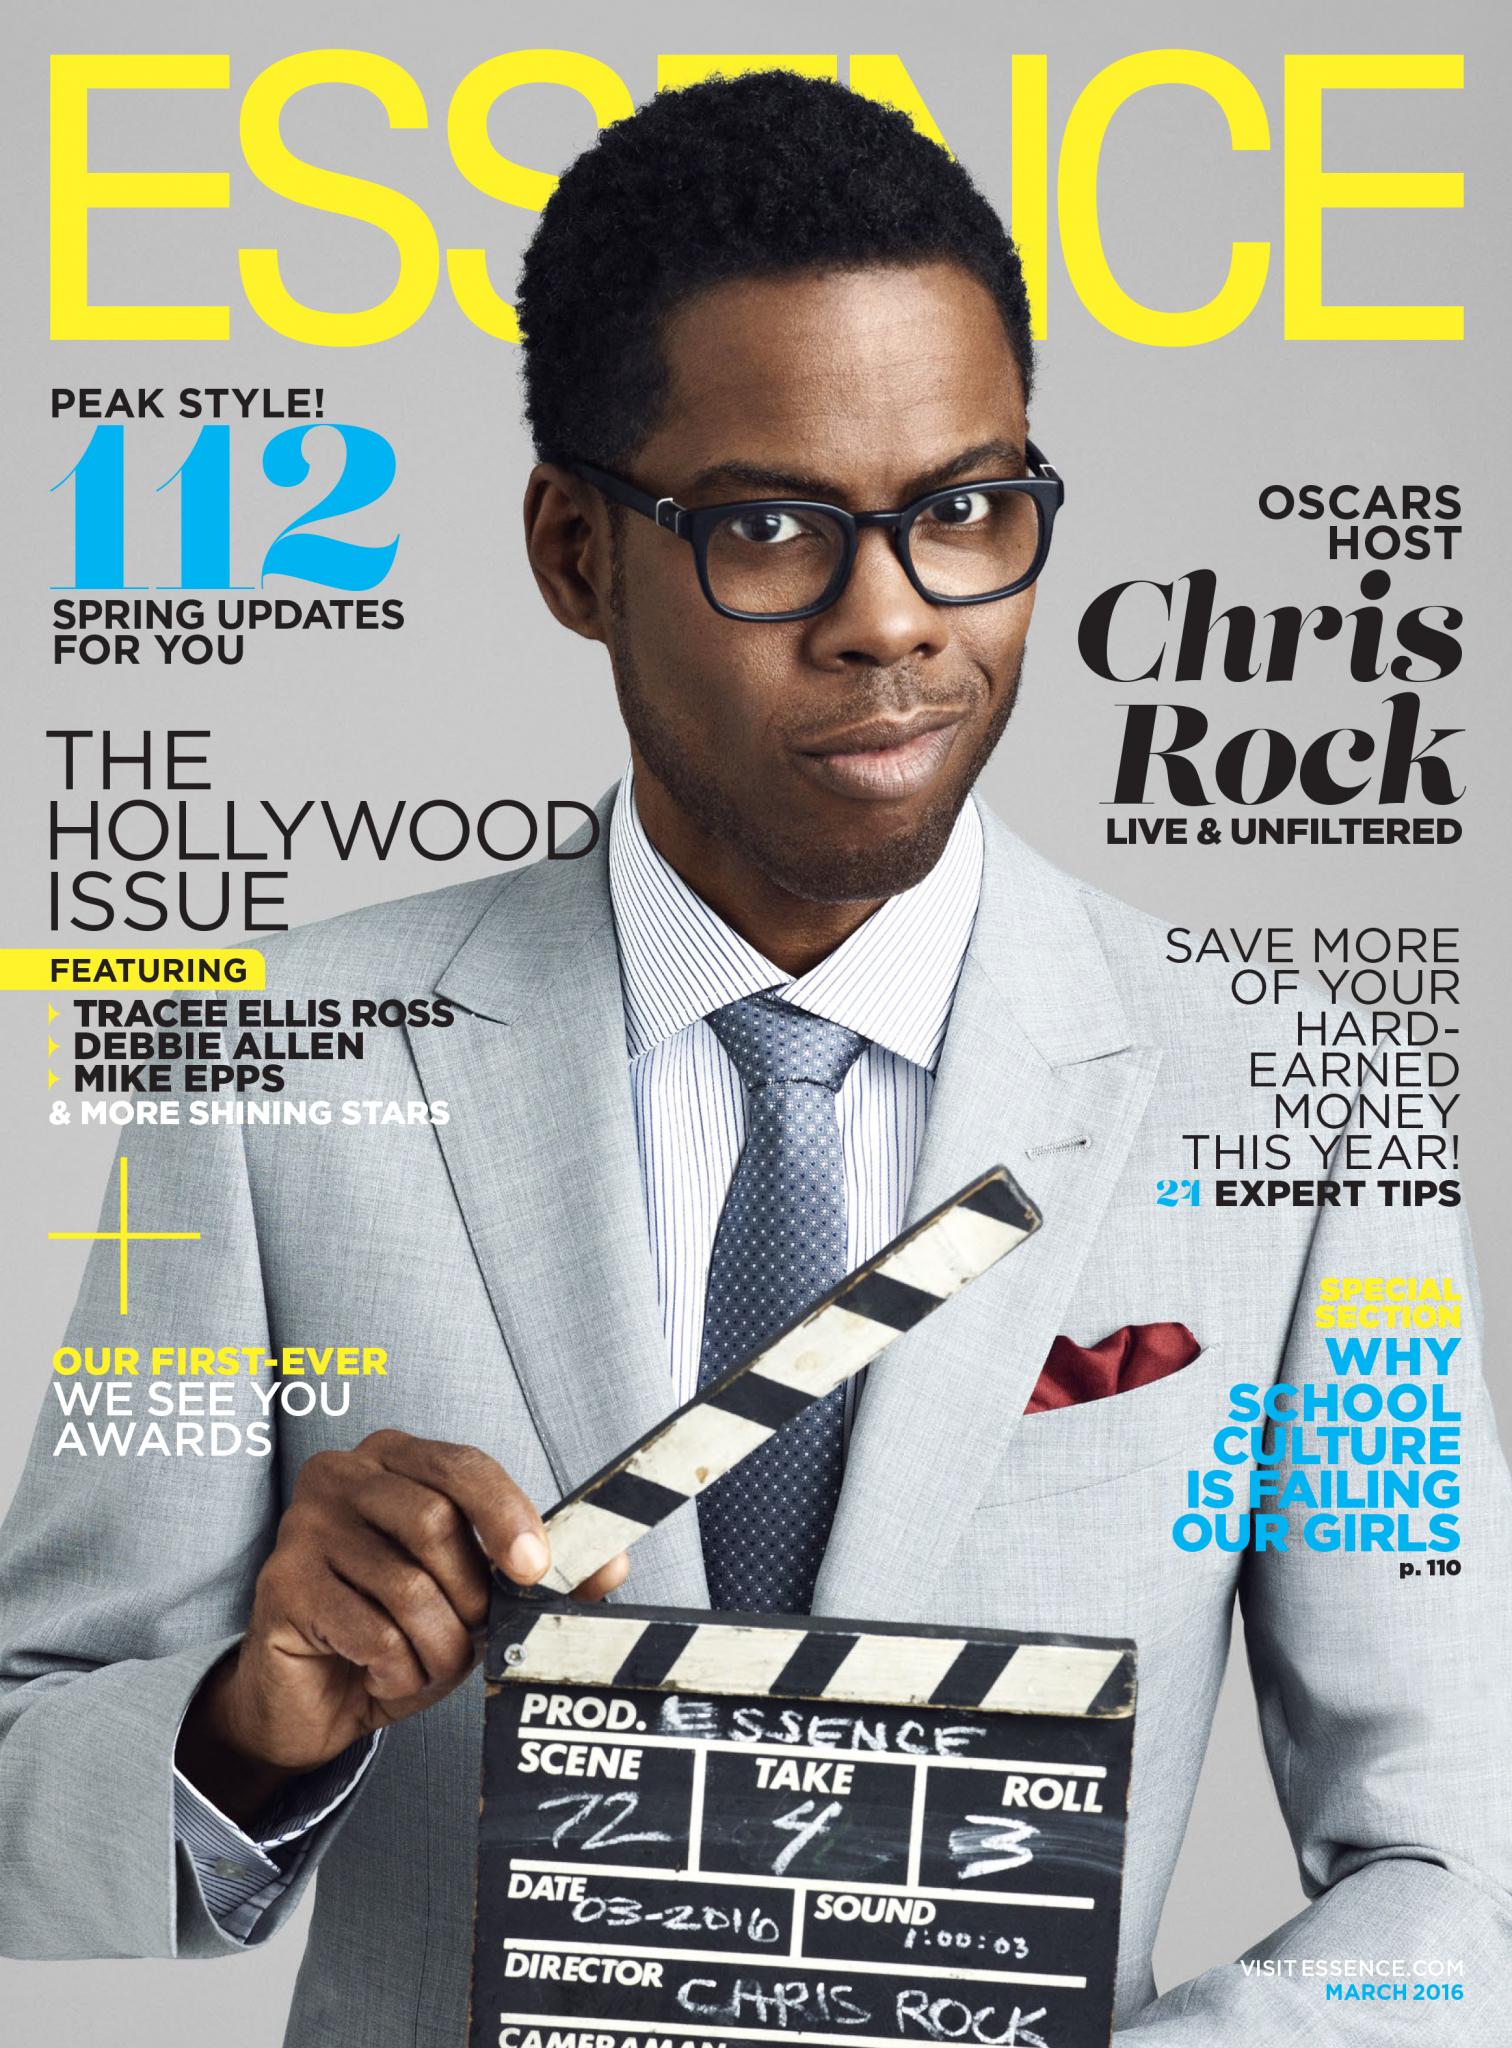 Chris Rock Graces First ESSENCE Cover, Talks Roles for Black Women in Hollywood